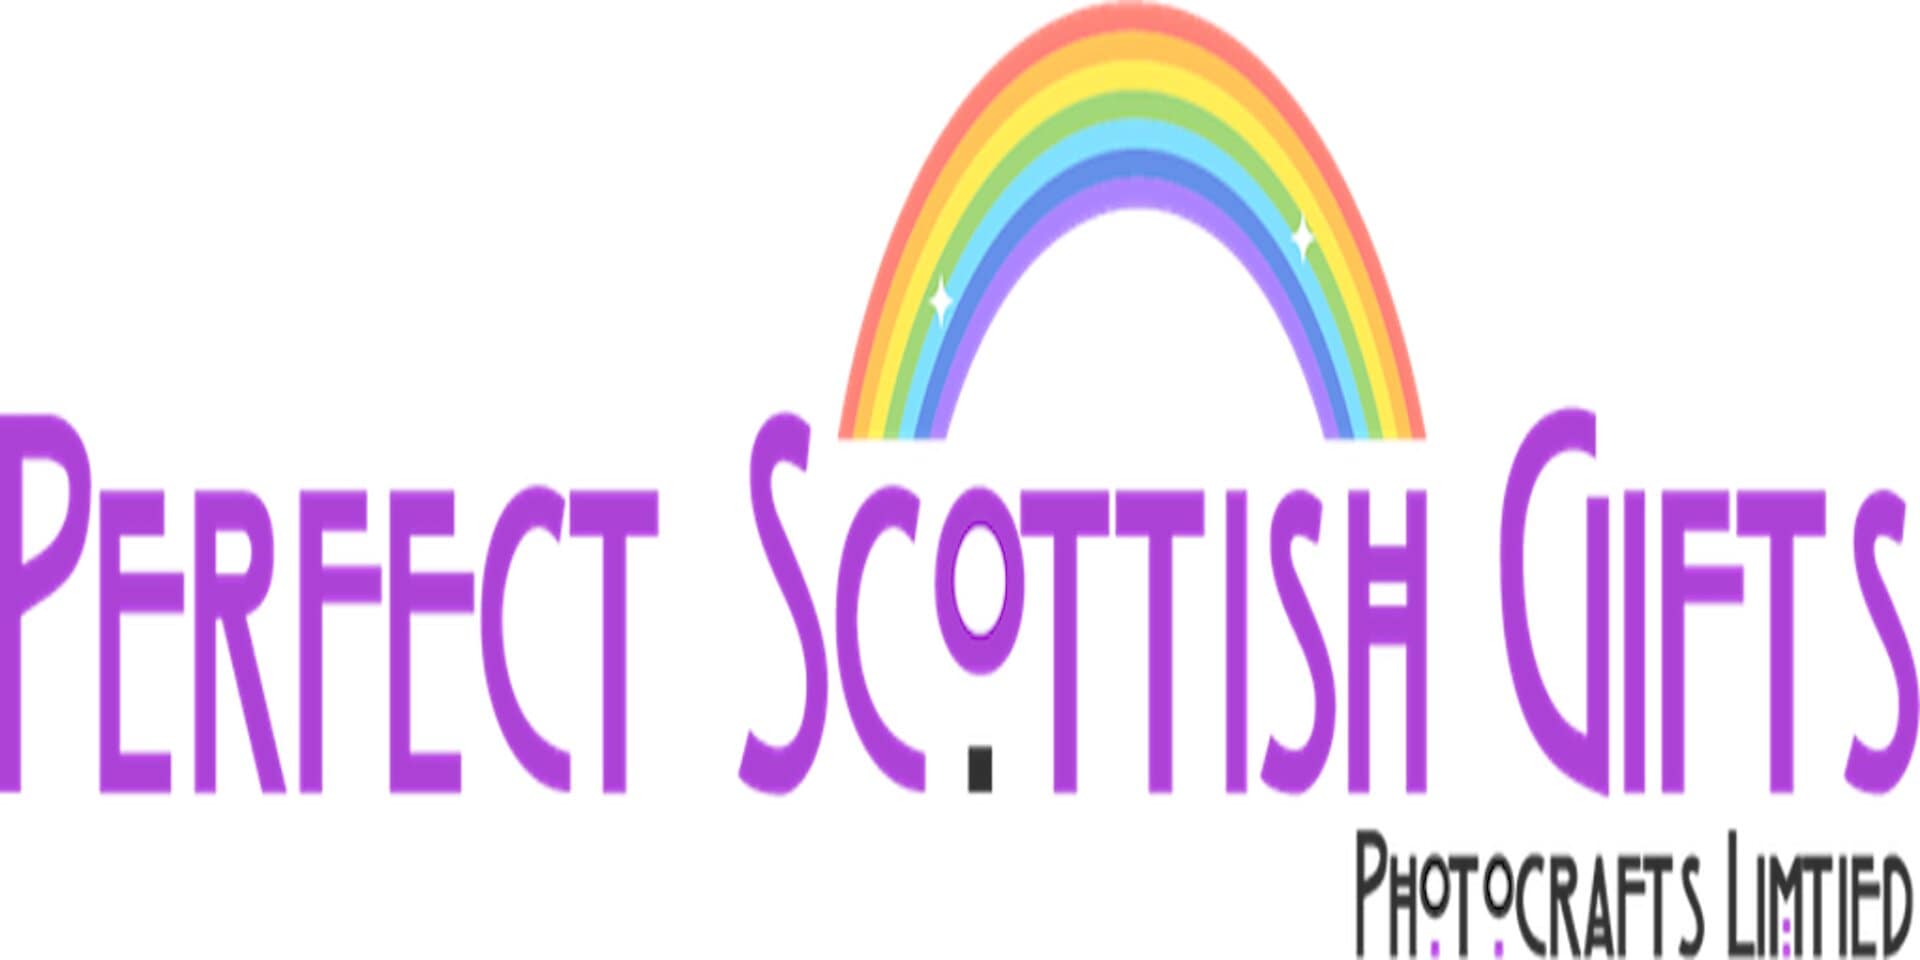 Logo of PhotoCrafts Limited Gift Shops In Paisley, Scotland